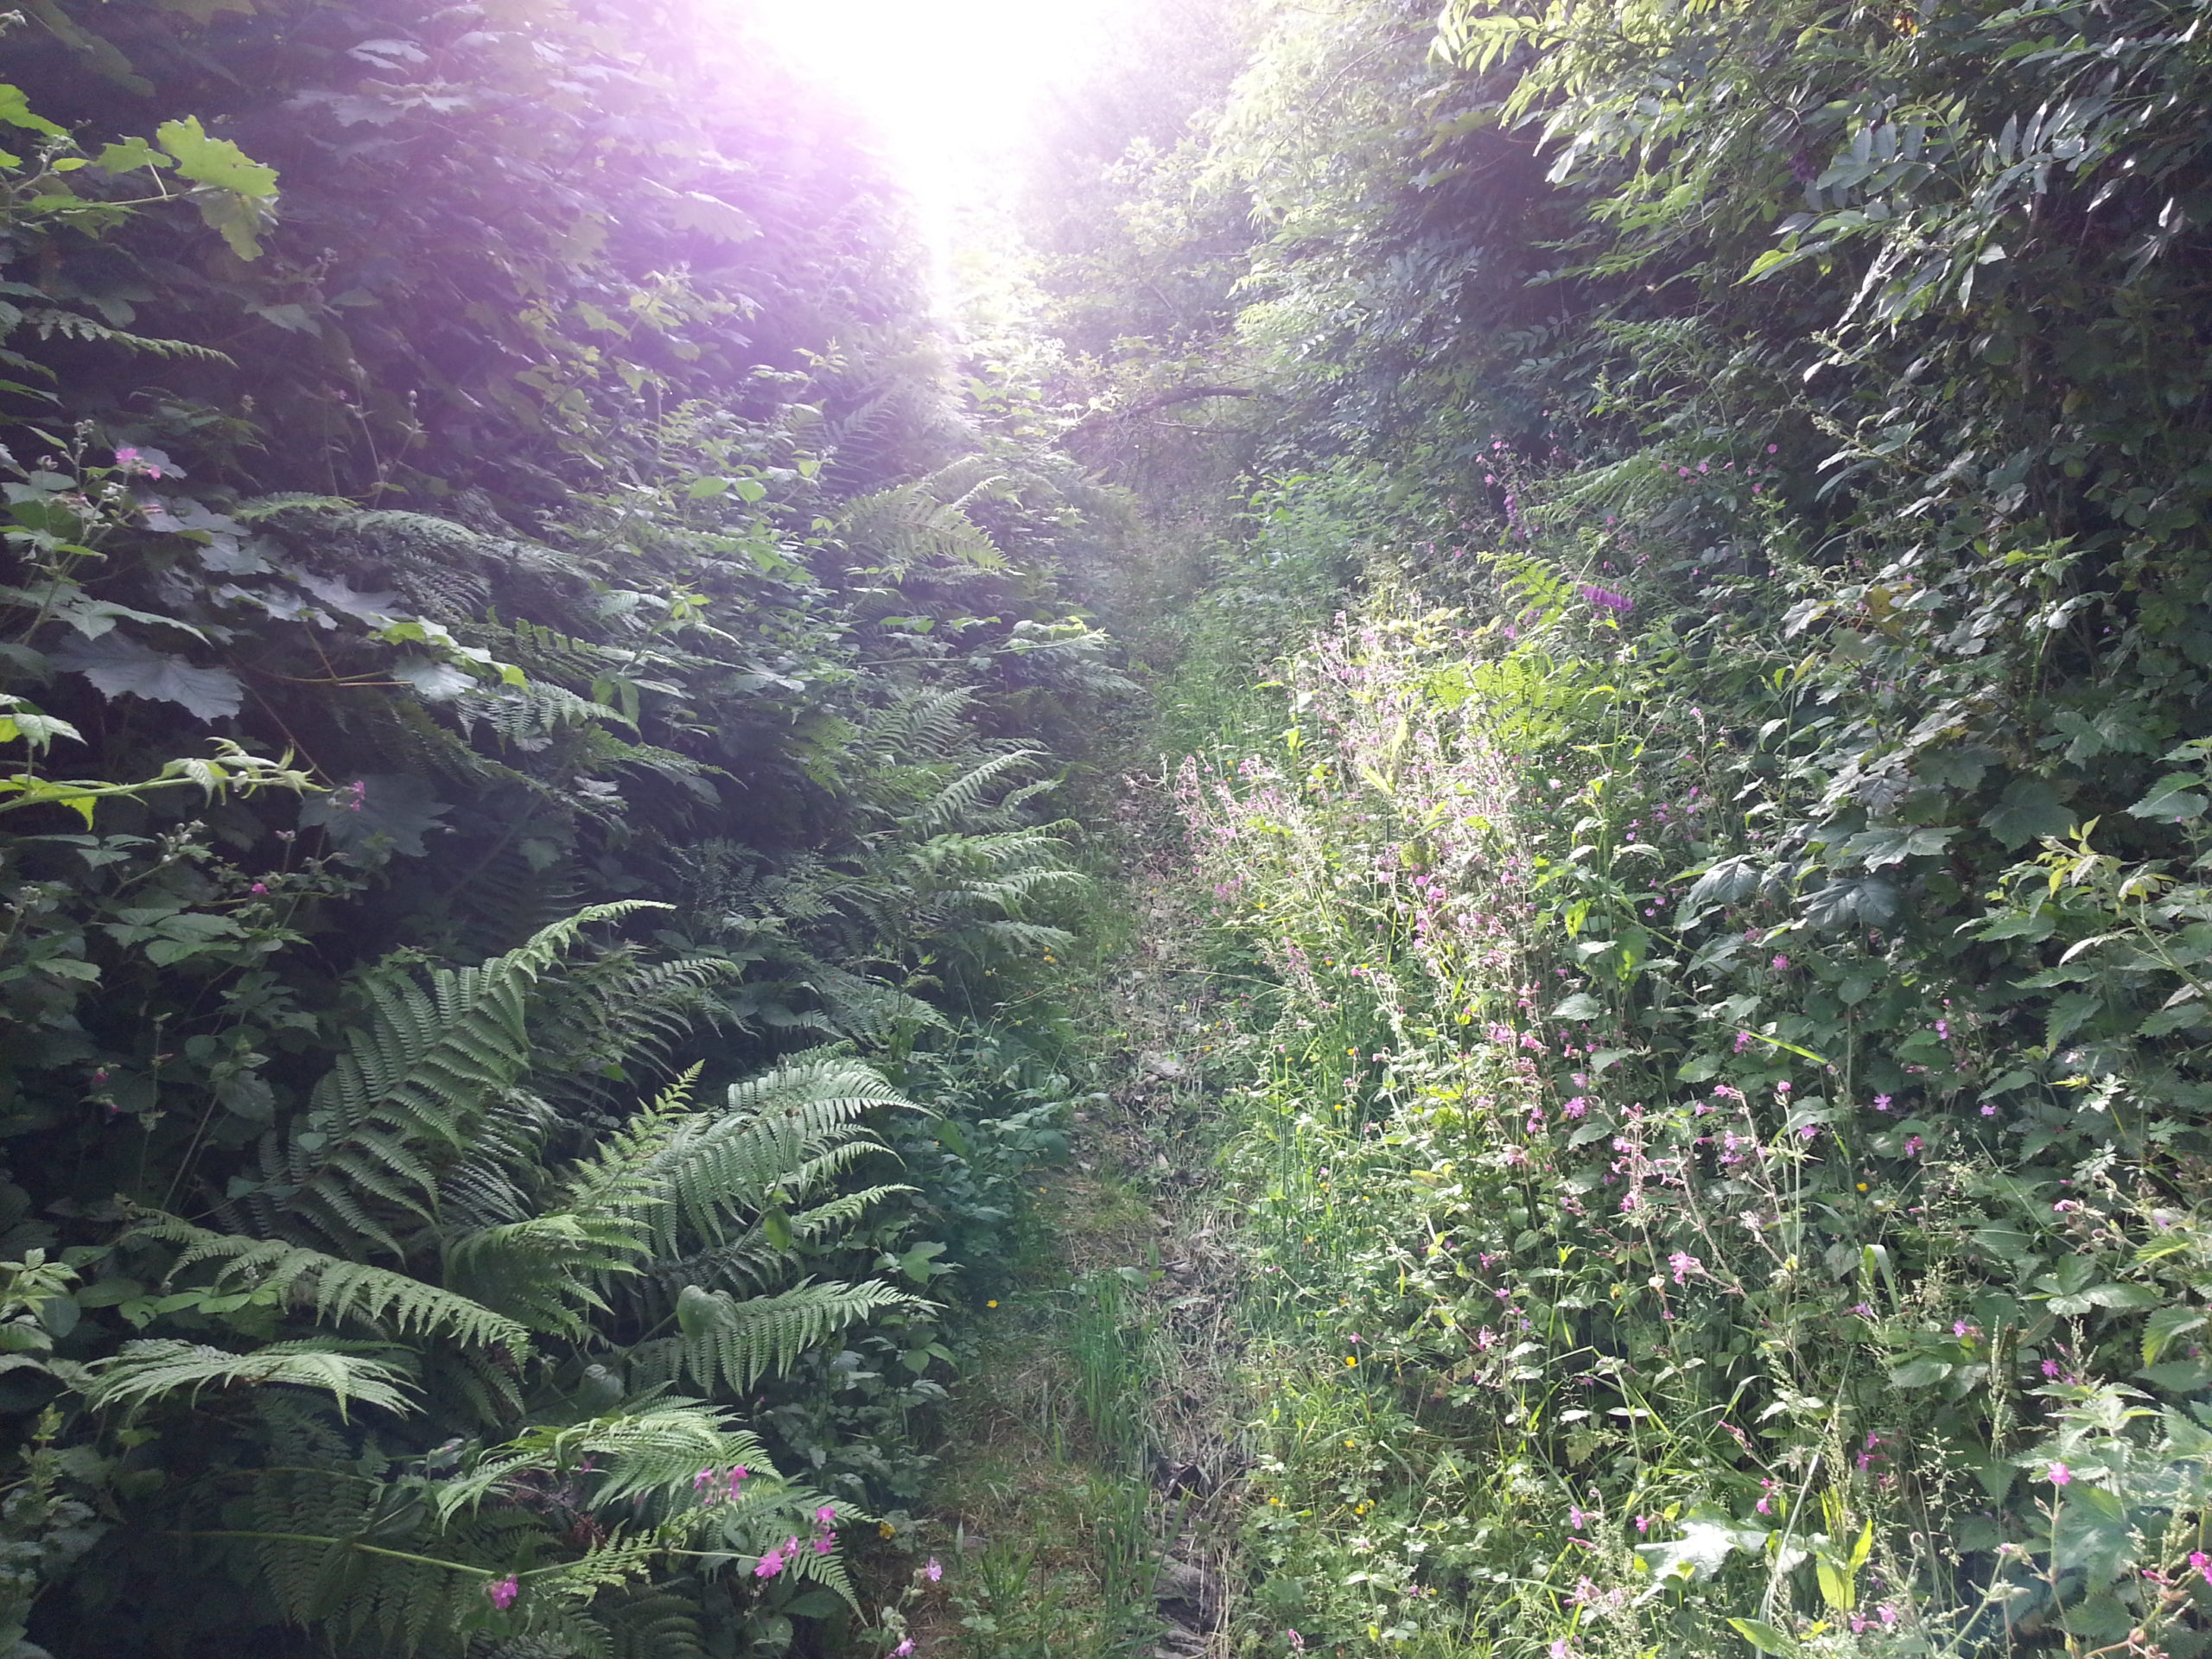 Very badly-maintained footpath in North Devon.